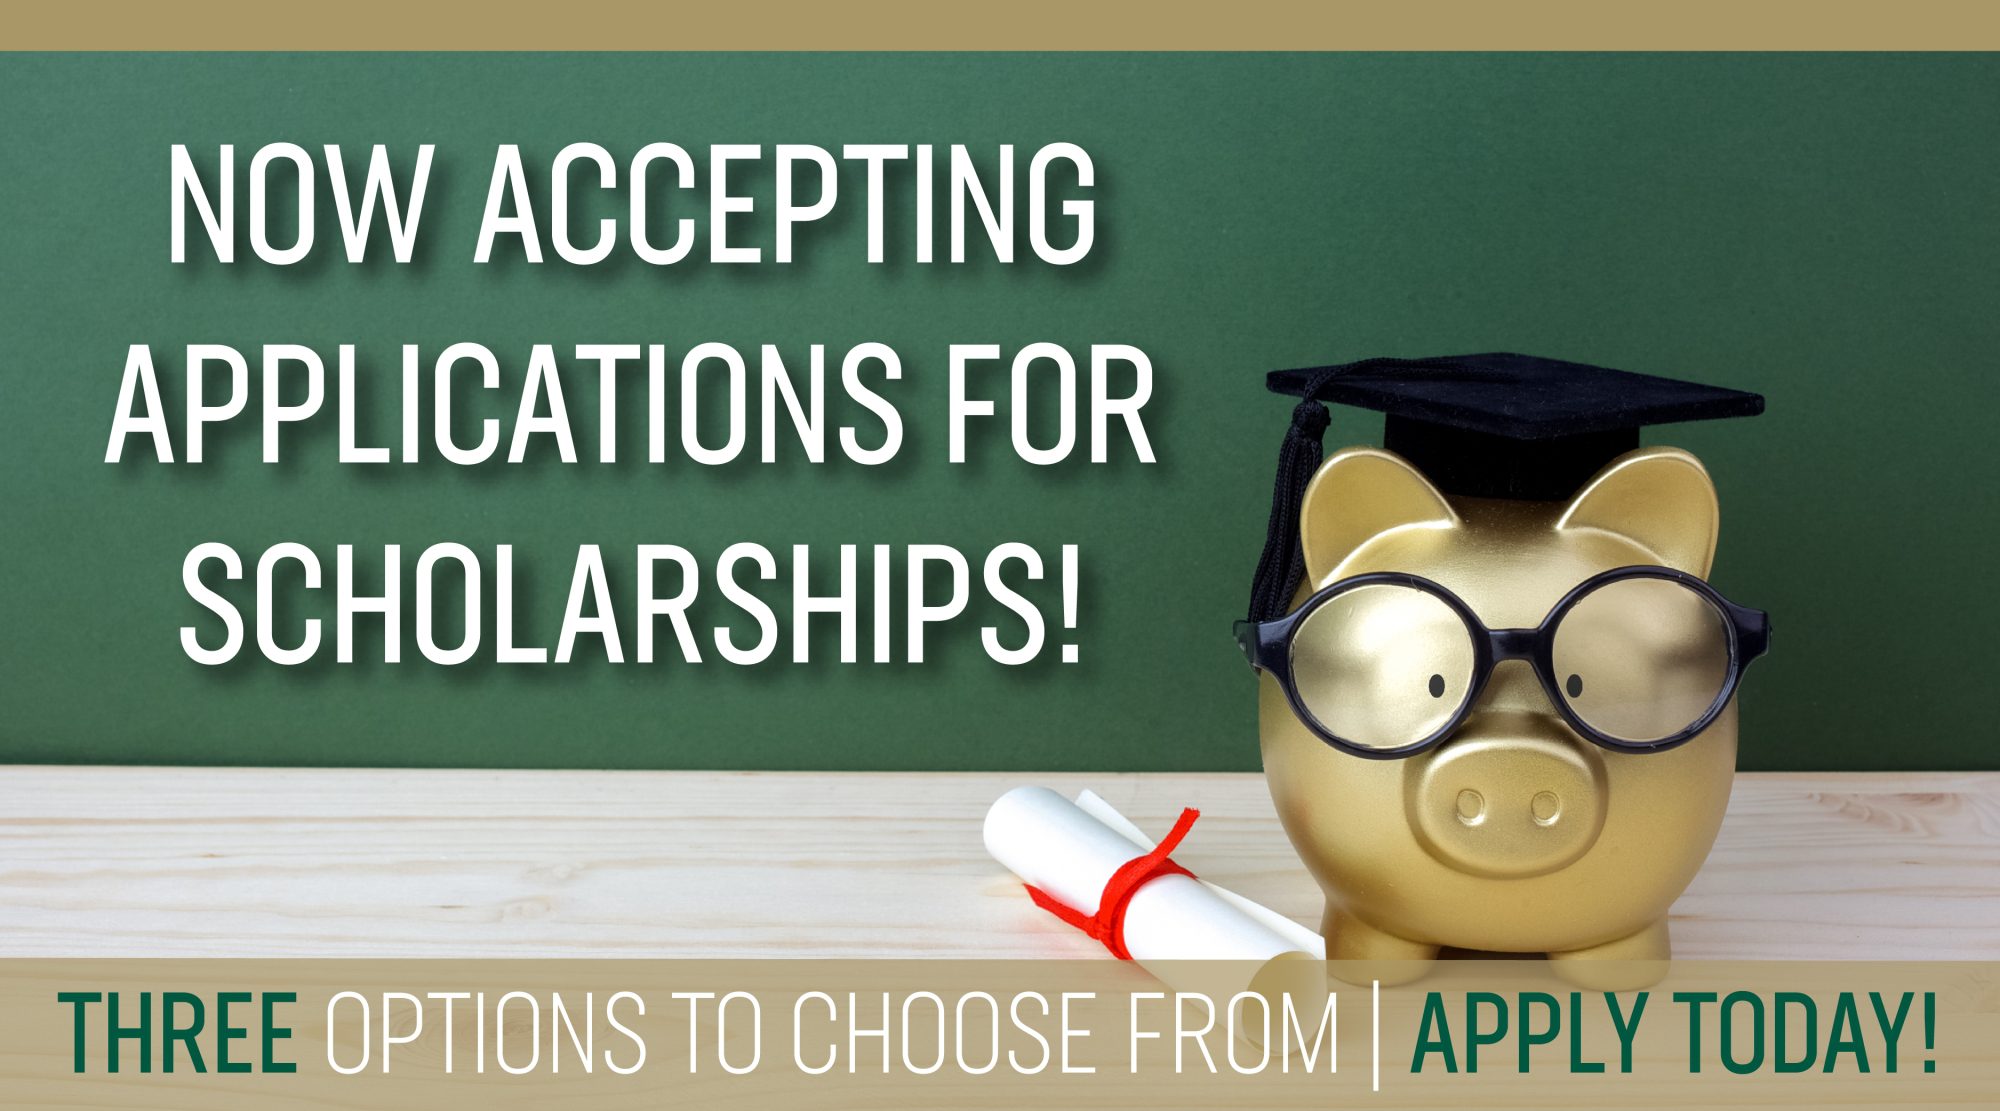 Now accepting applications for 2022 – 2023 scholarships